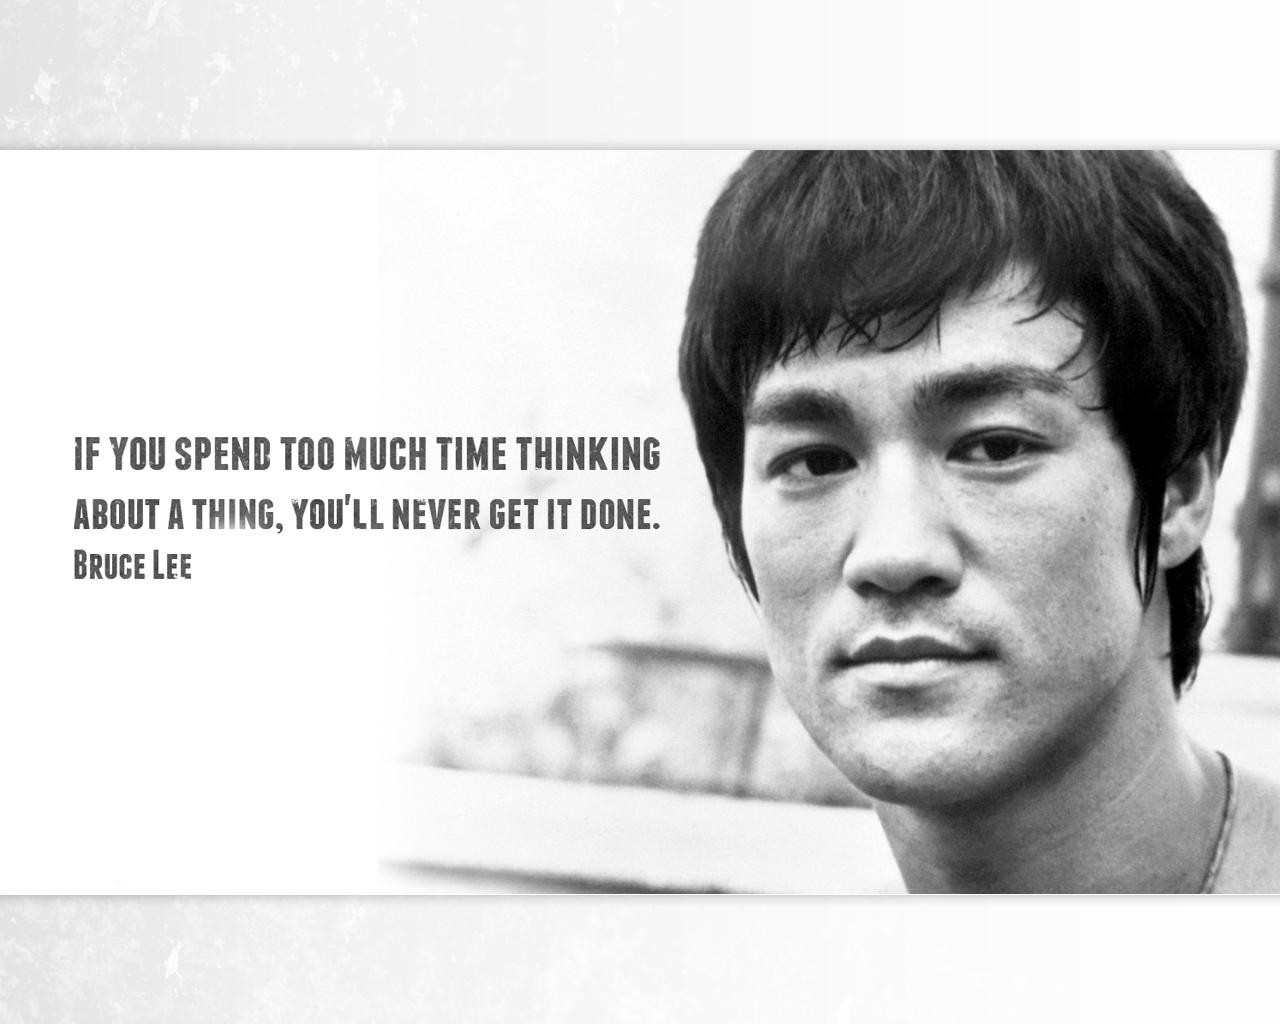 Bruce Lee Motivational Quotes
 BRUCE LEE Quotes